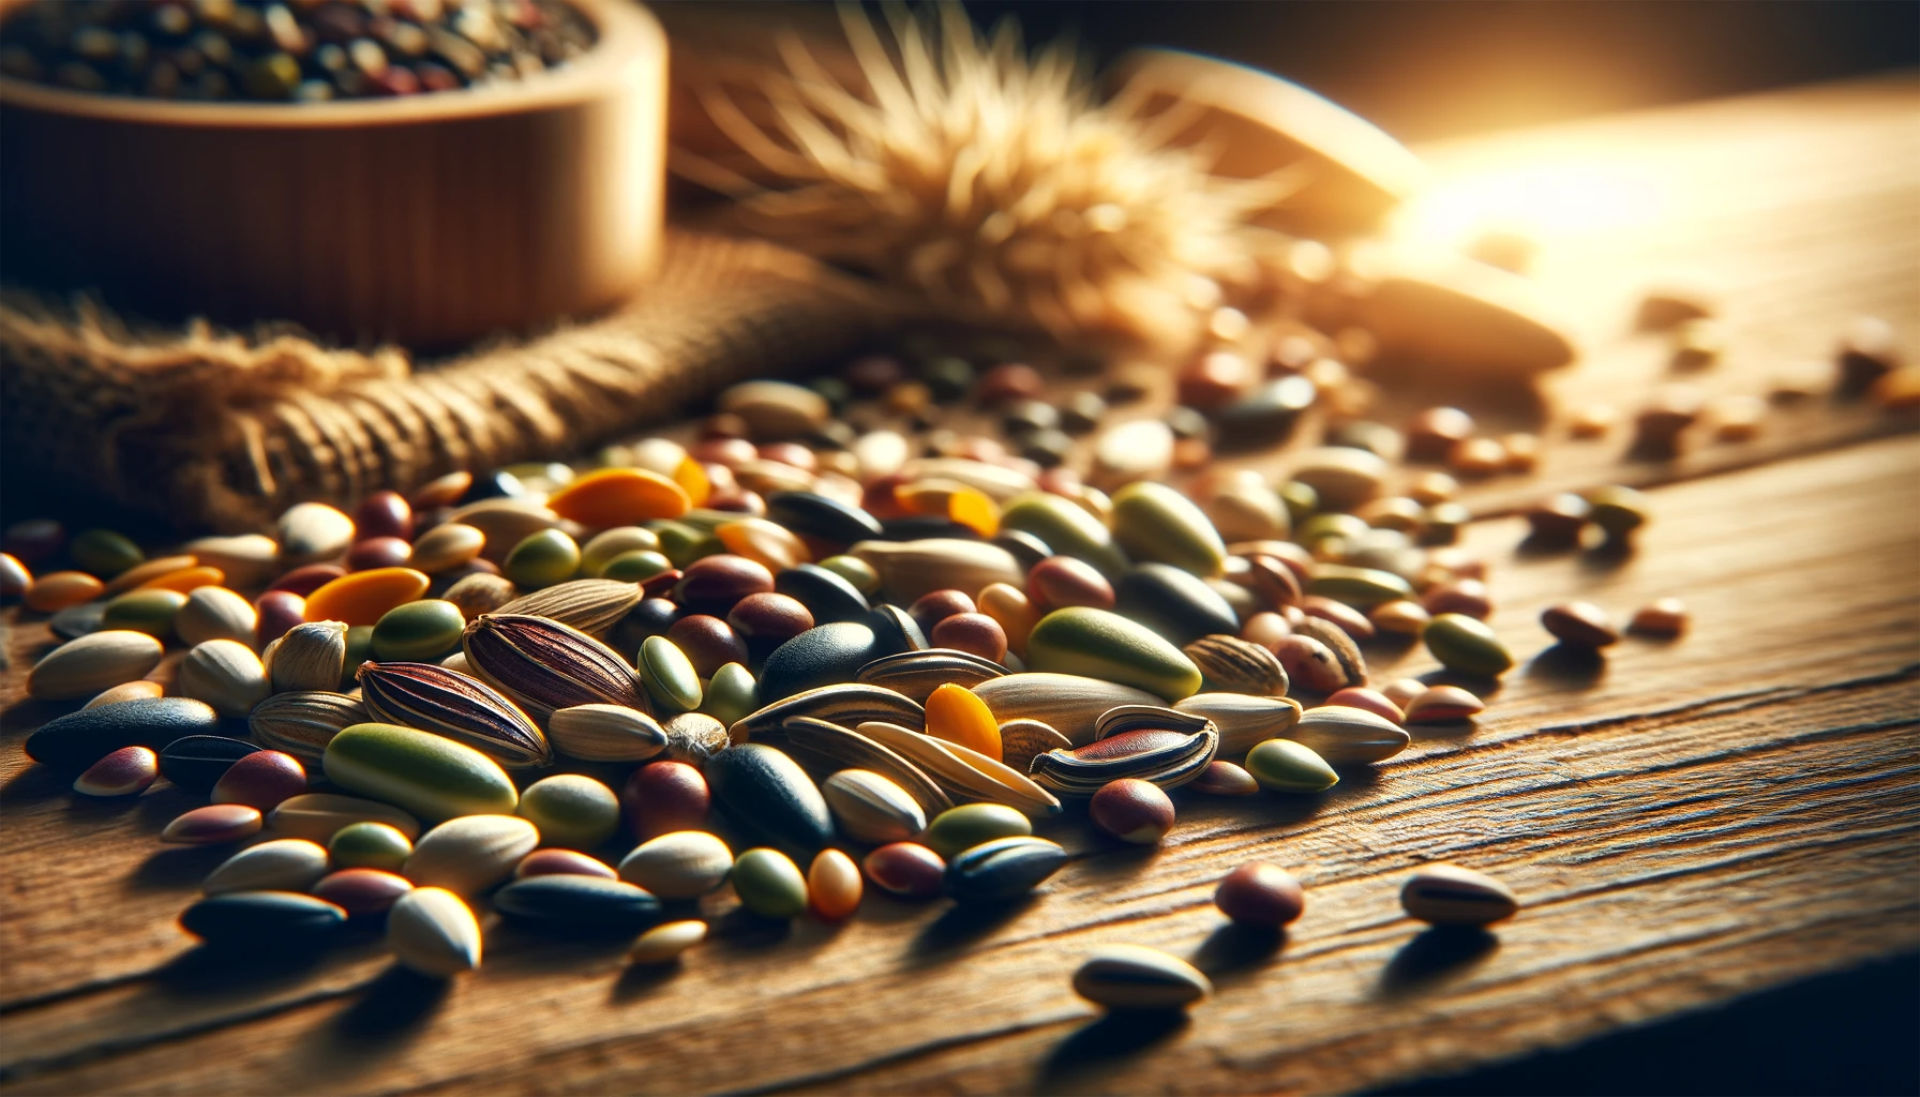 This image features a close-up view of various organic seeds, highlighting their diversity in shape, color, and size. The natural and warm lighting enhances the earthy feel, emphasizing the essence of organic seeds.